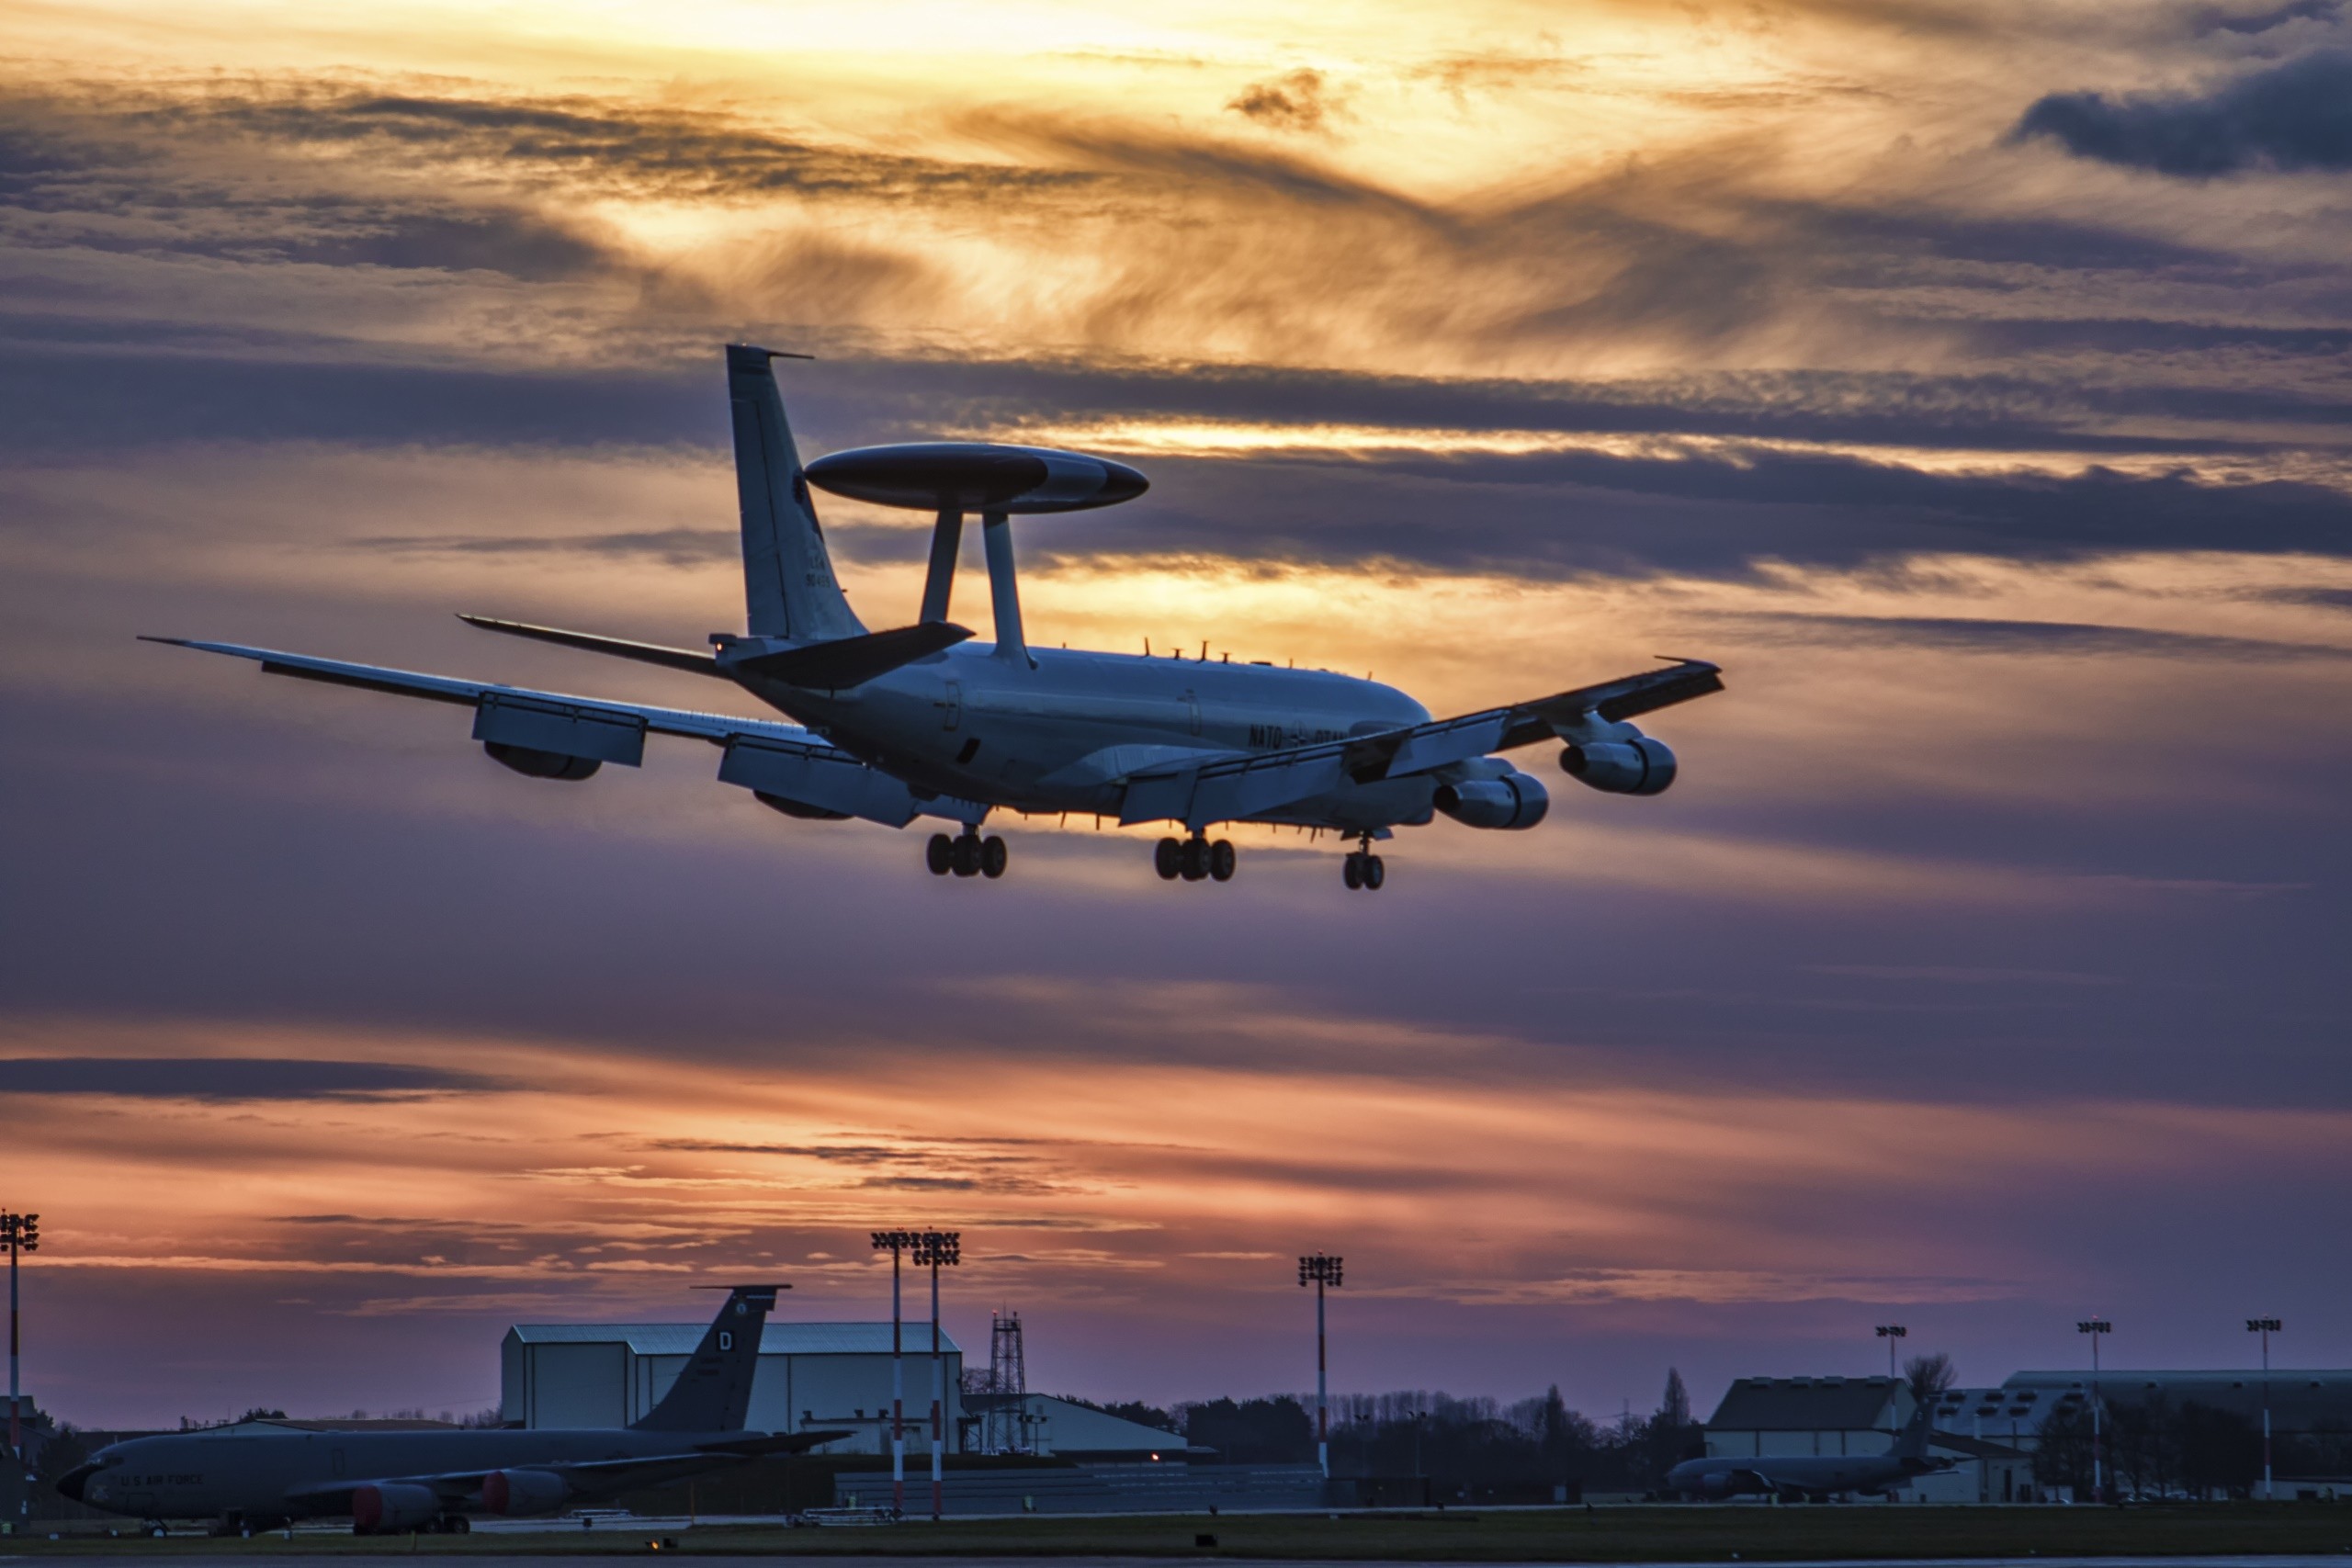 General 2560x1707 military sky sunlight aircraft military aircraft vehicle Boeing sunset Boeing E-3 Sentry American aircraft